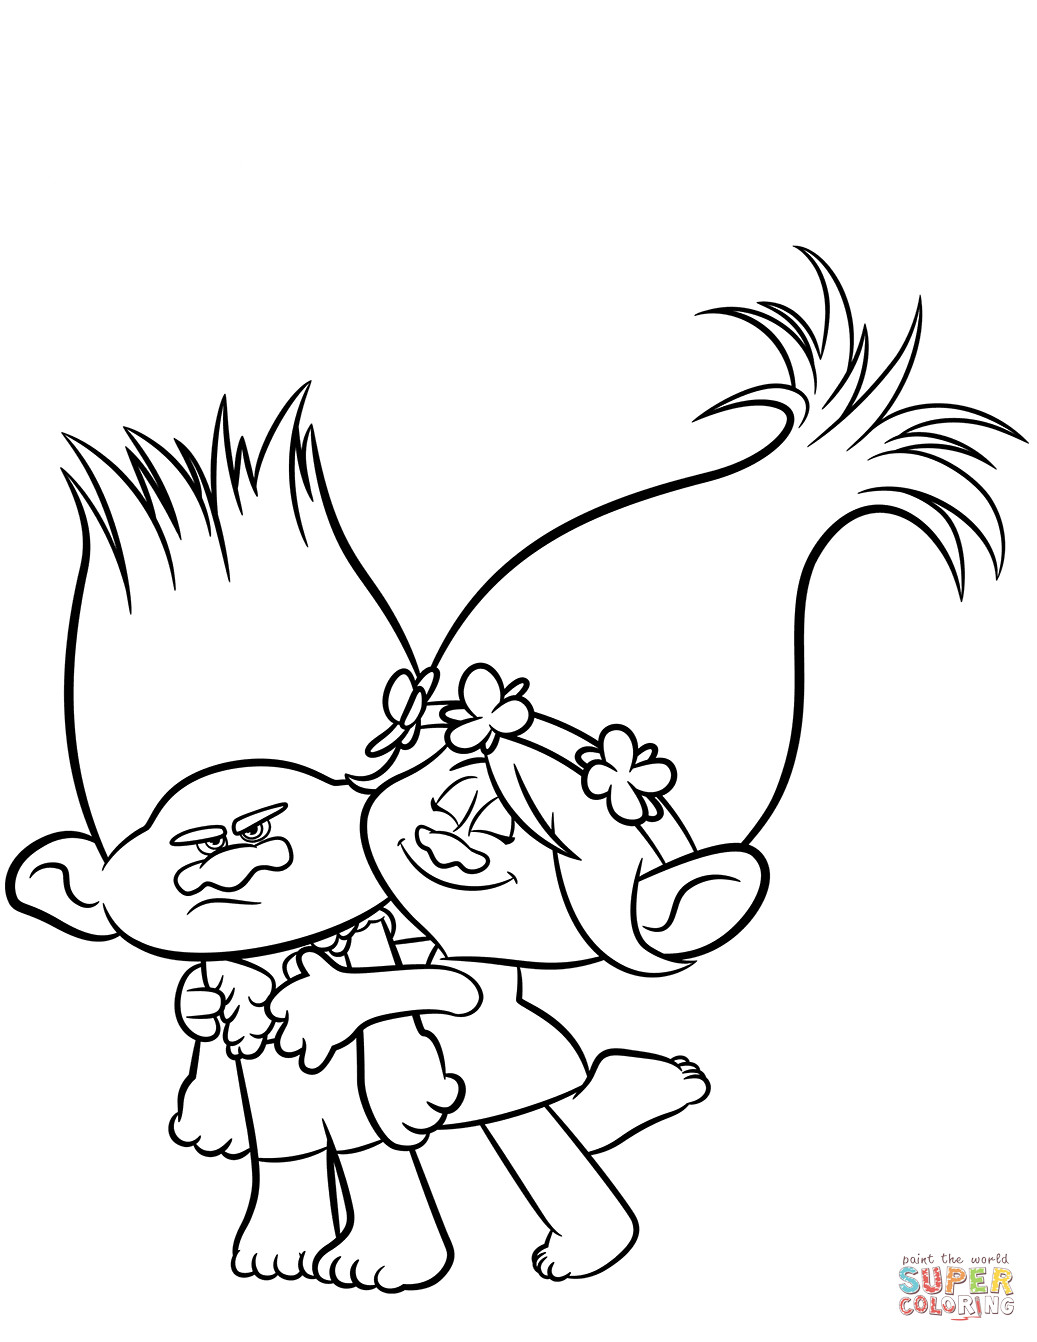 Poppy Trolls Coloring Pages
 Branch & Poppy from Trolls coloring page